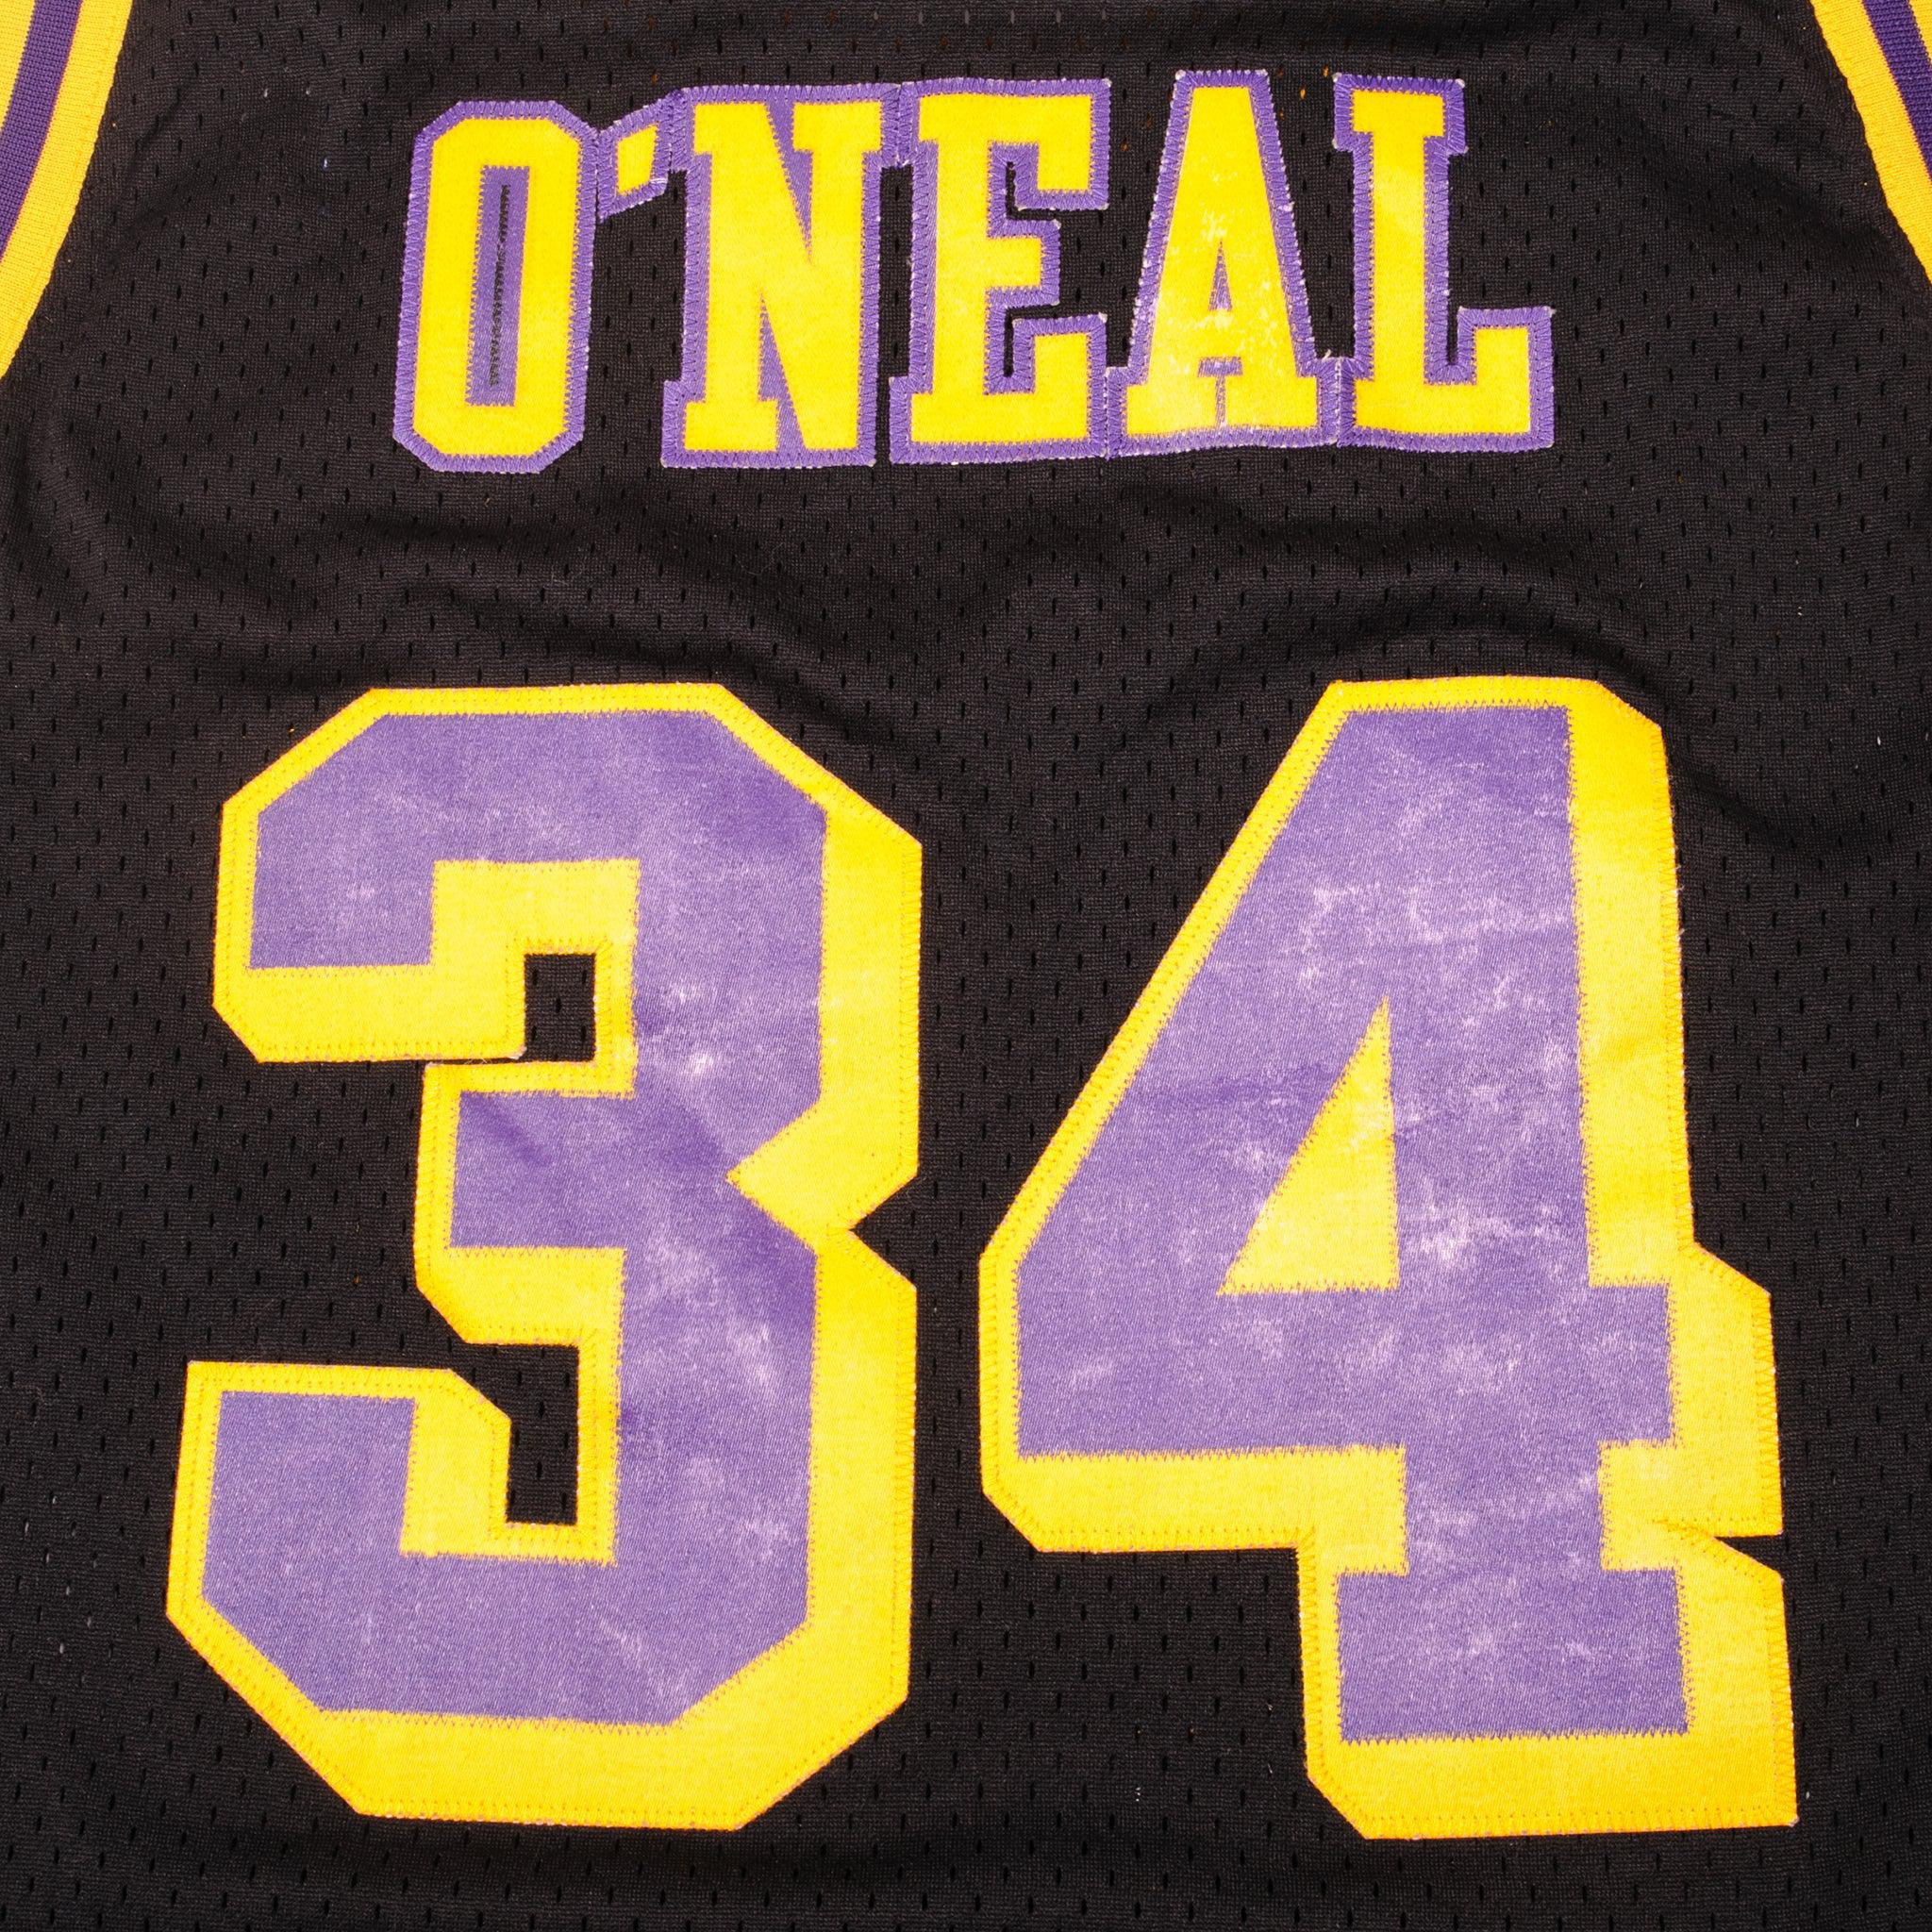 Shaquille O'Neal Los Angeles Lakers 34 Jersey – Nonstop Jersey